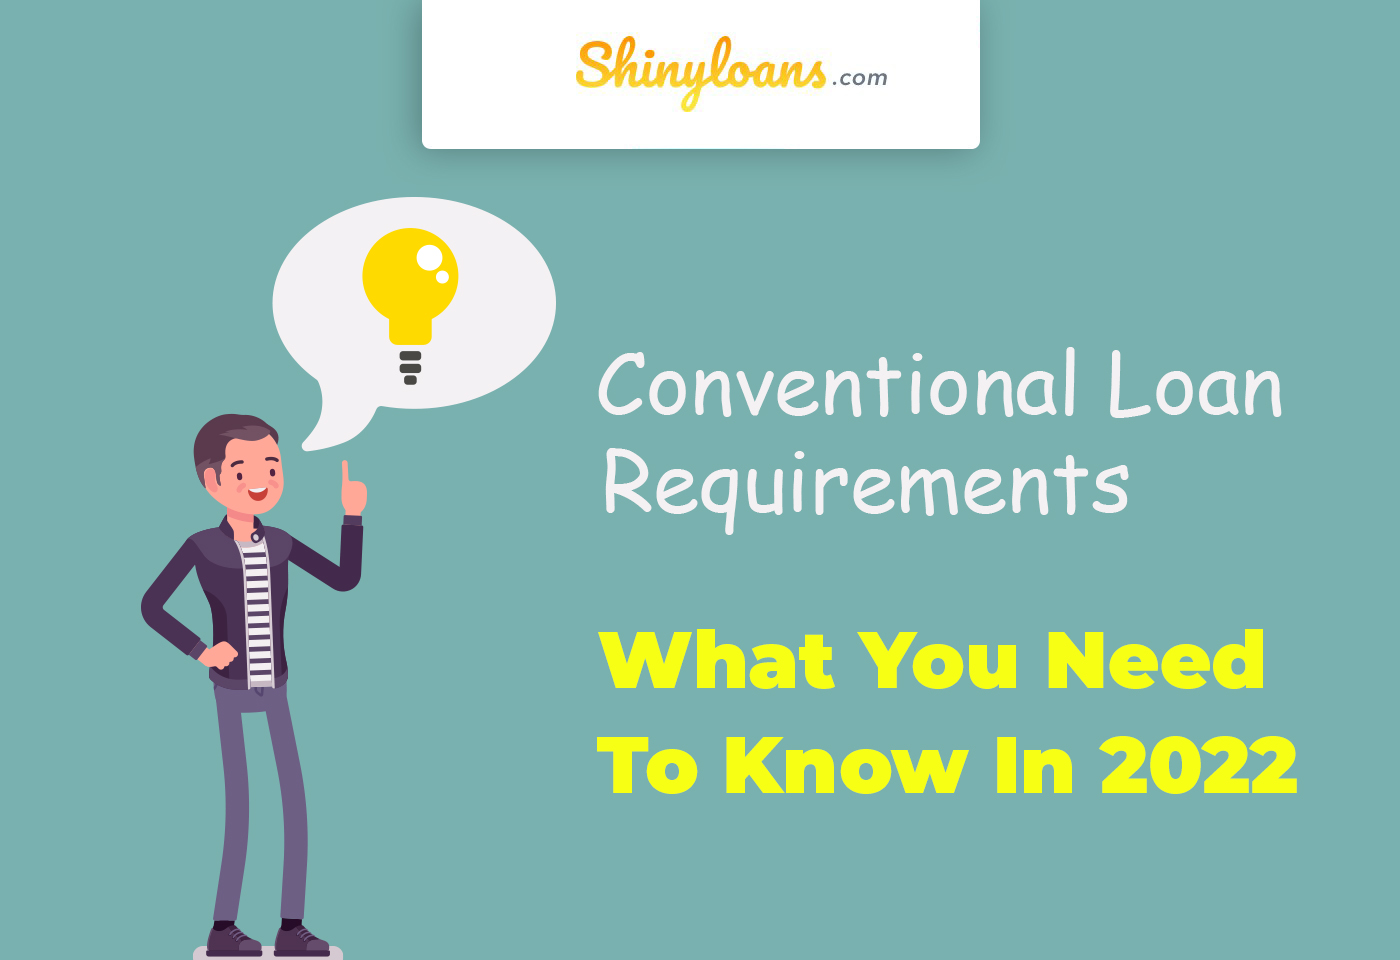 Сonventional Loan Requirements - What You Need To Know In 2022?